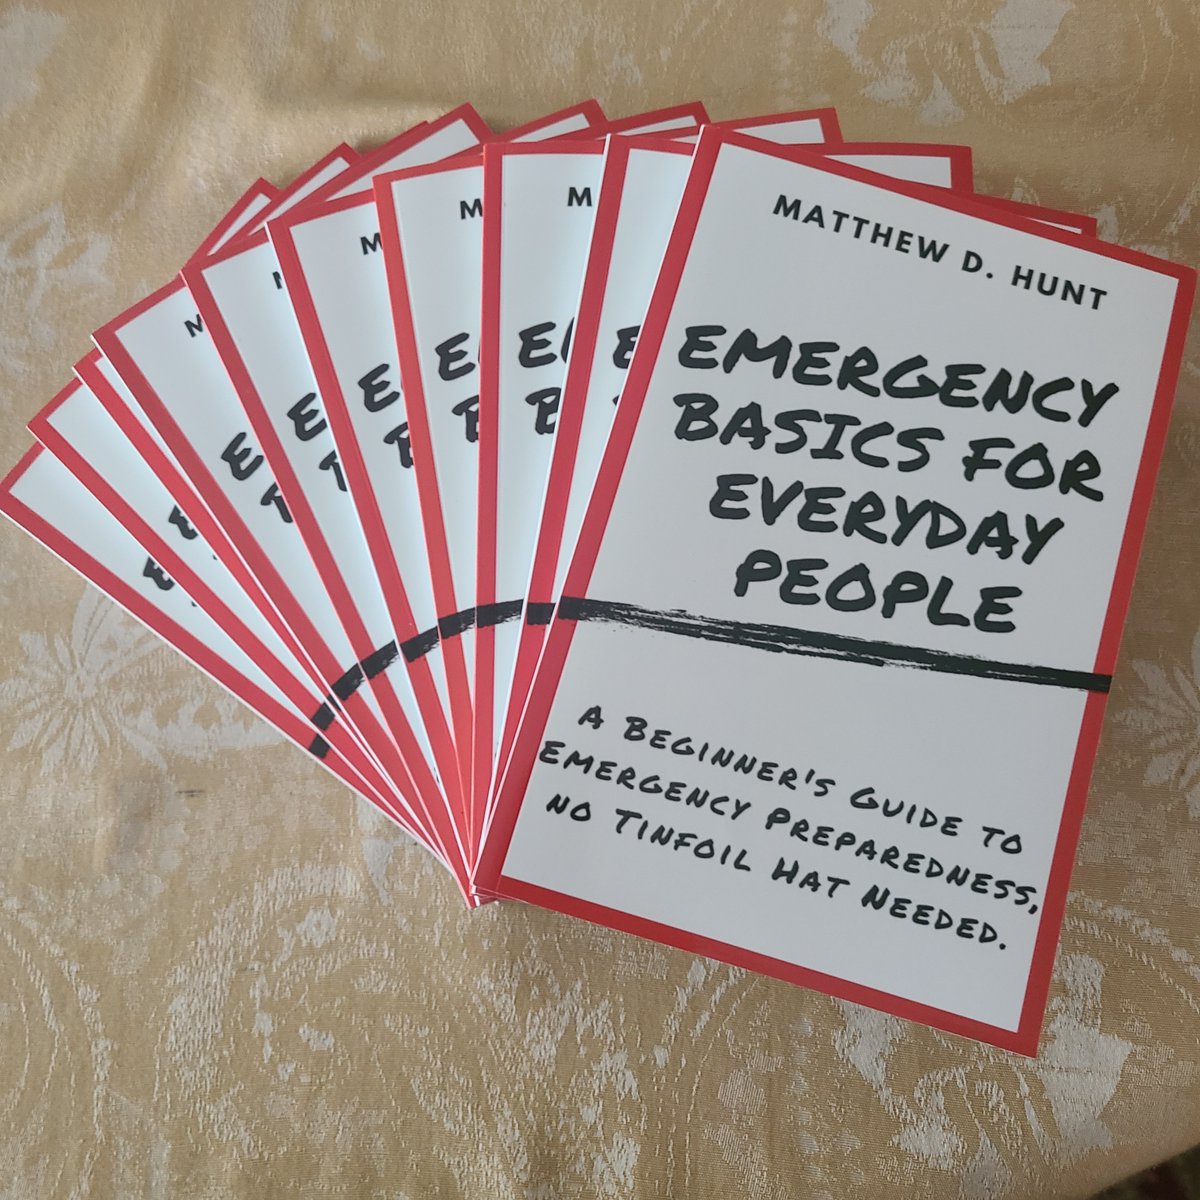 I know that there are many people who do not know how to #prepare for an #emergency. I wrote a book that covers the basics and gives you a firm foundation for most emergencies. Check it out on Amazon/your local bookstore. Emergency basics for everyday people #preparedness #pnw